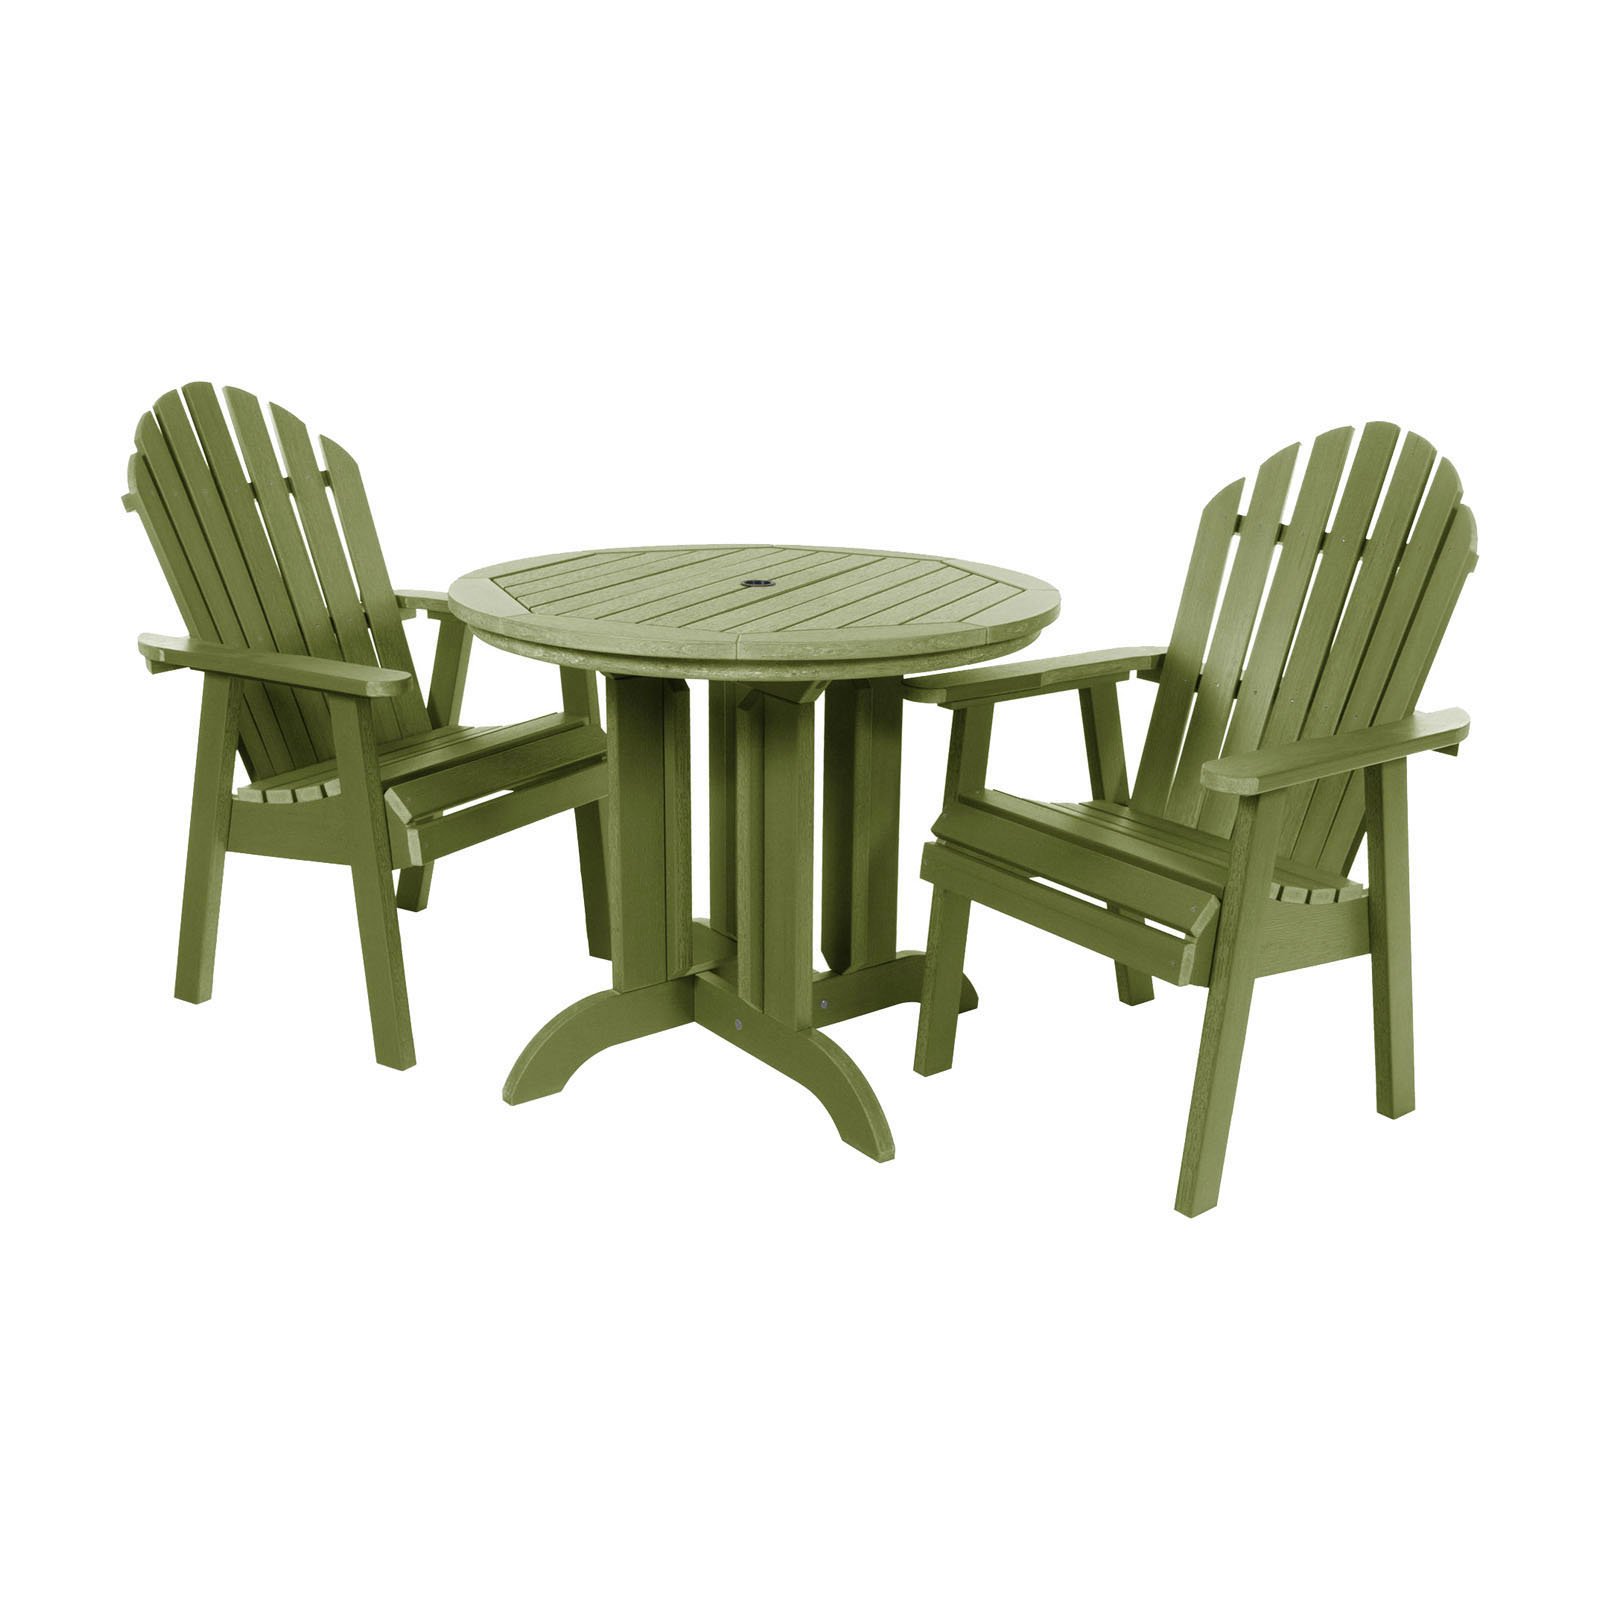 The Sequoia Professional Commercial Grade 3 Pc Muskoka Adirondack Bistro Dining Set with 36” Table - image 1 of 2